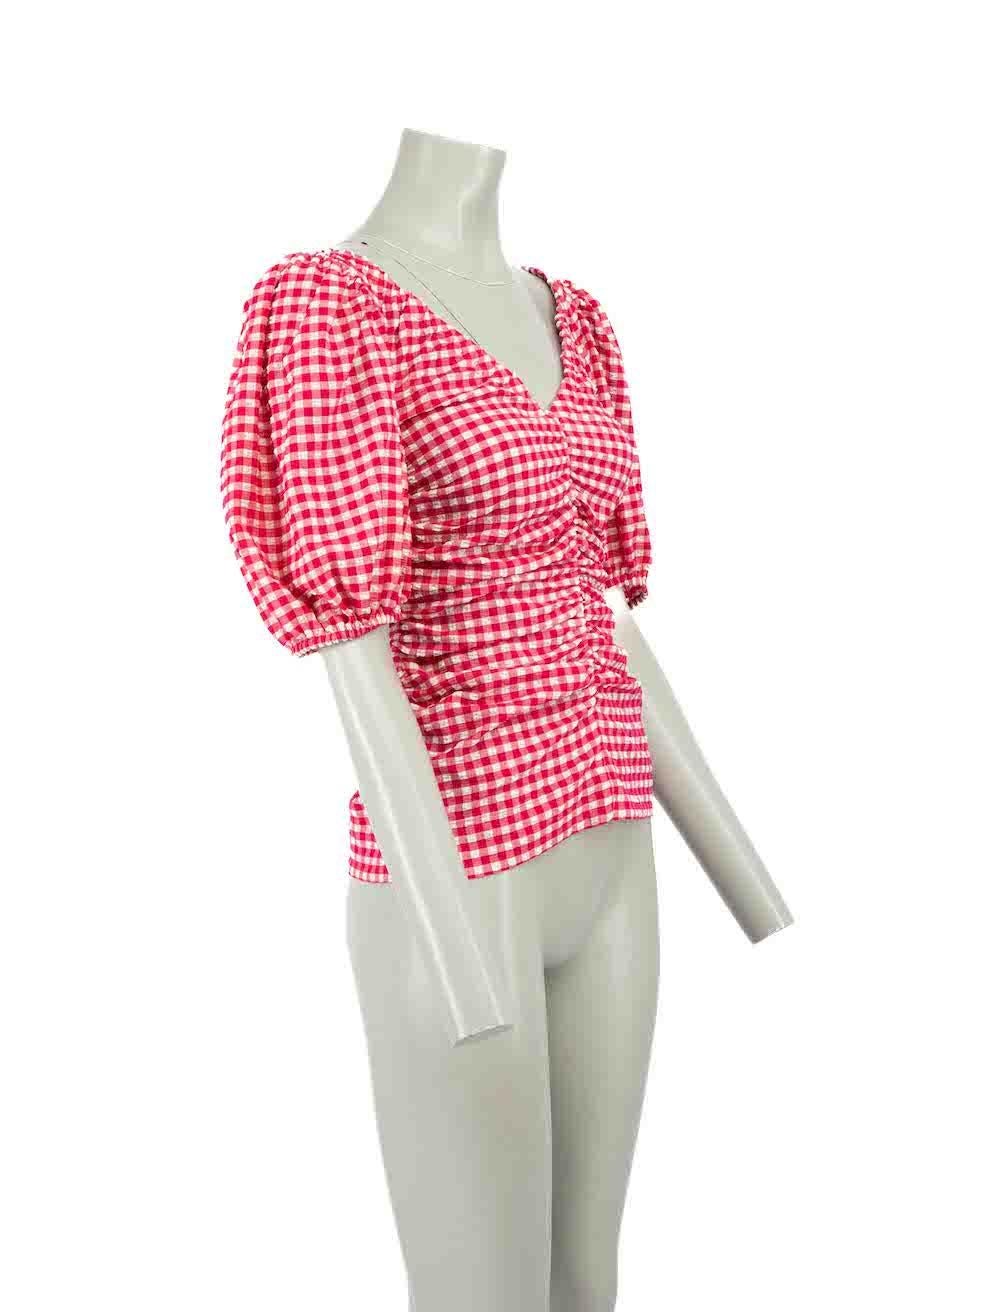 CONDITION is Never worn, with tags. No visible wear to top is evident on this new Ganni designer resale item.
 
 Details
 Love Potion model
 Red
 Polyester
 Puff sleeves top
 Gingham pattern
 Ruched accent
 V neckline
 Elasticated shoulder and